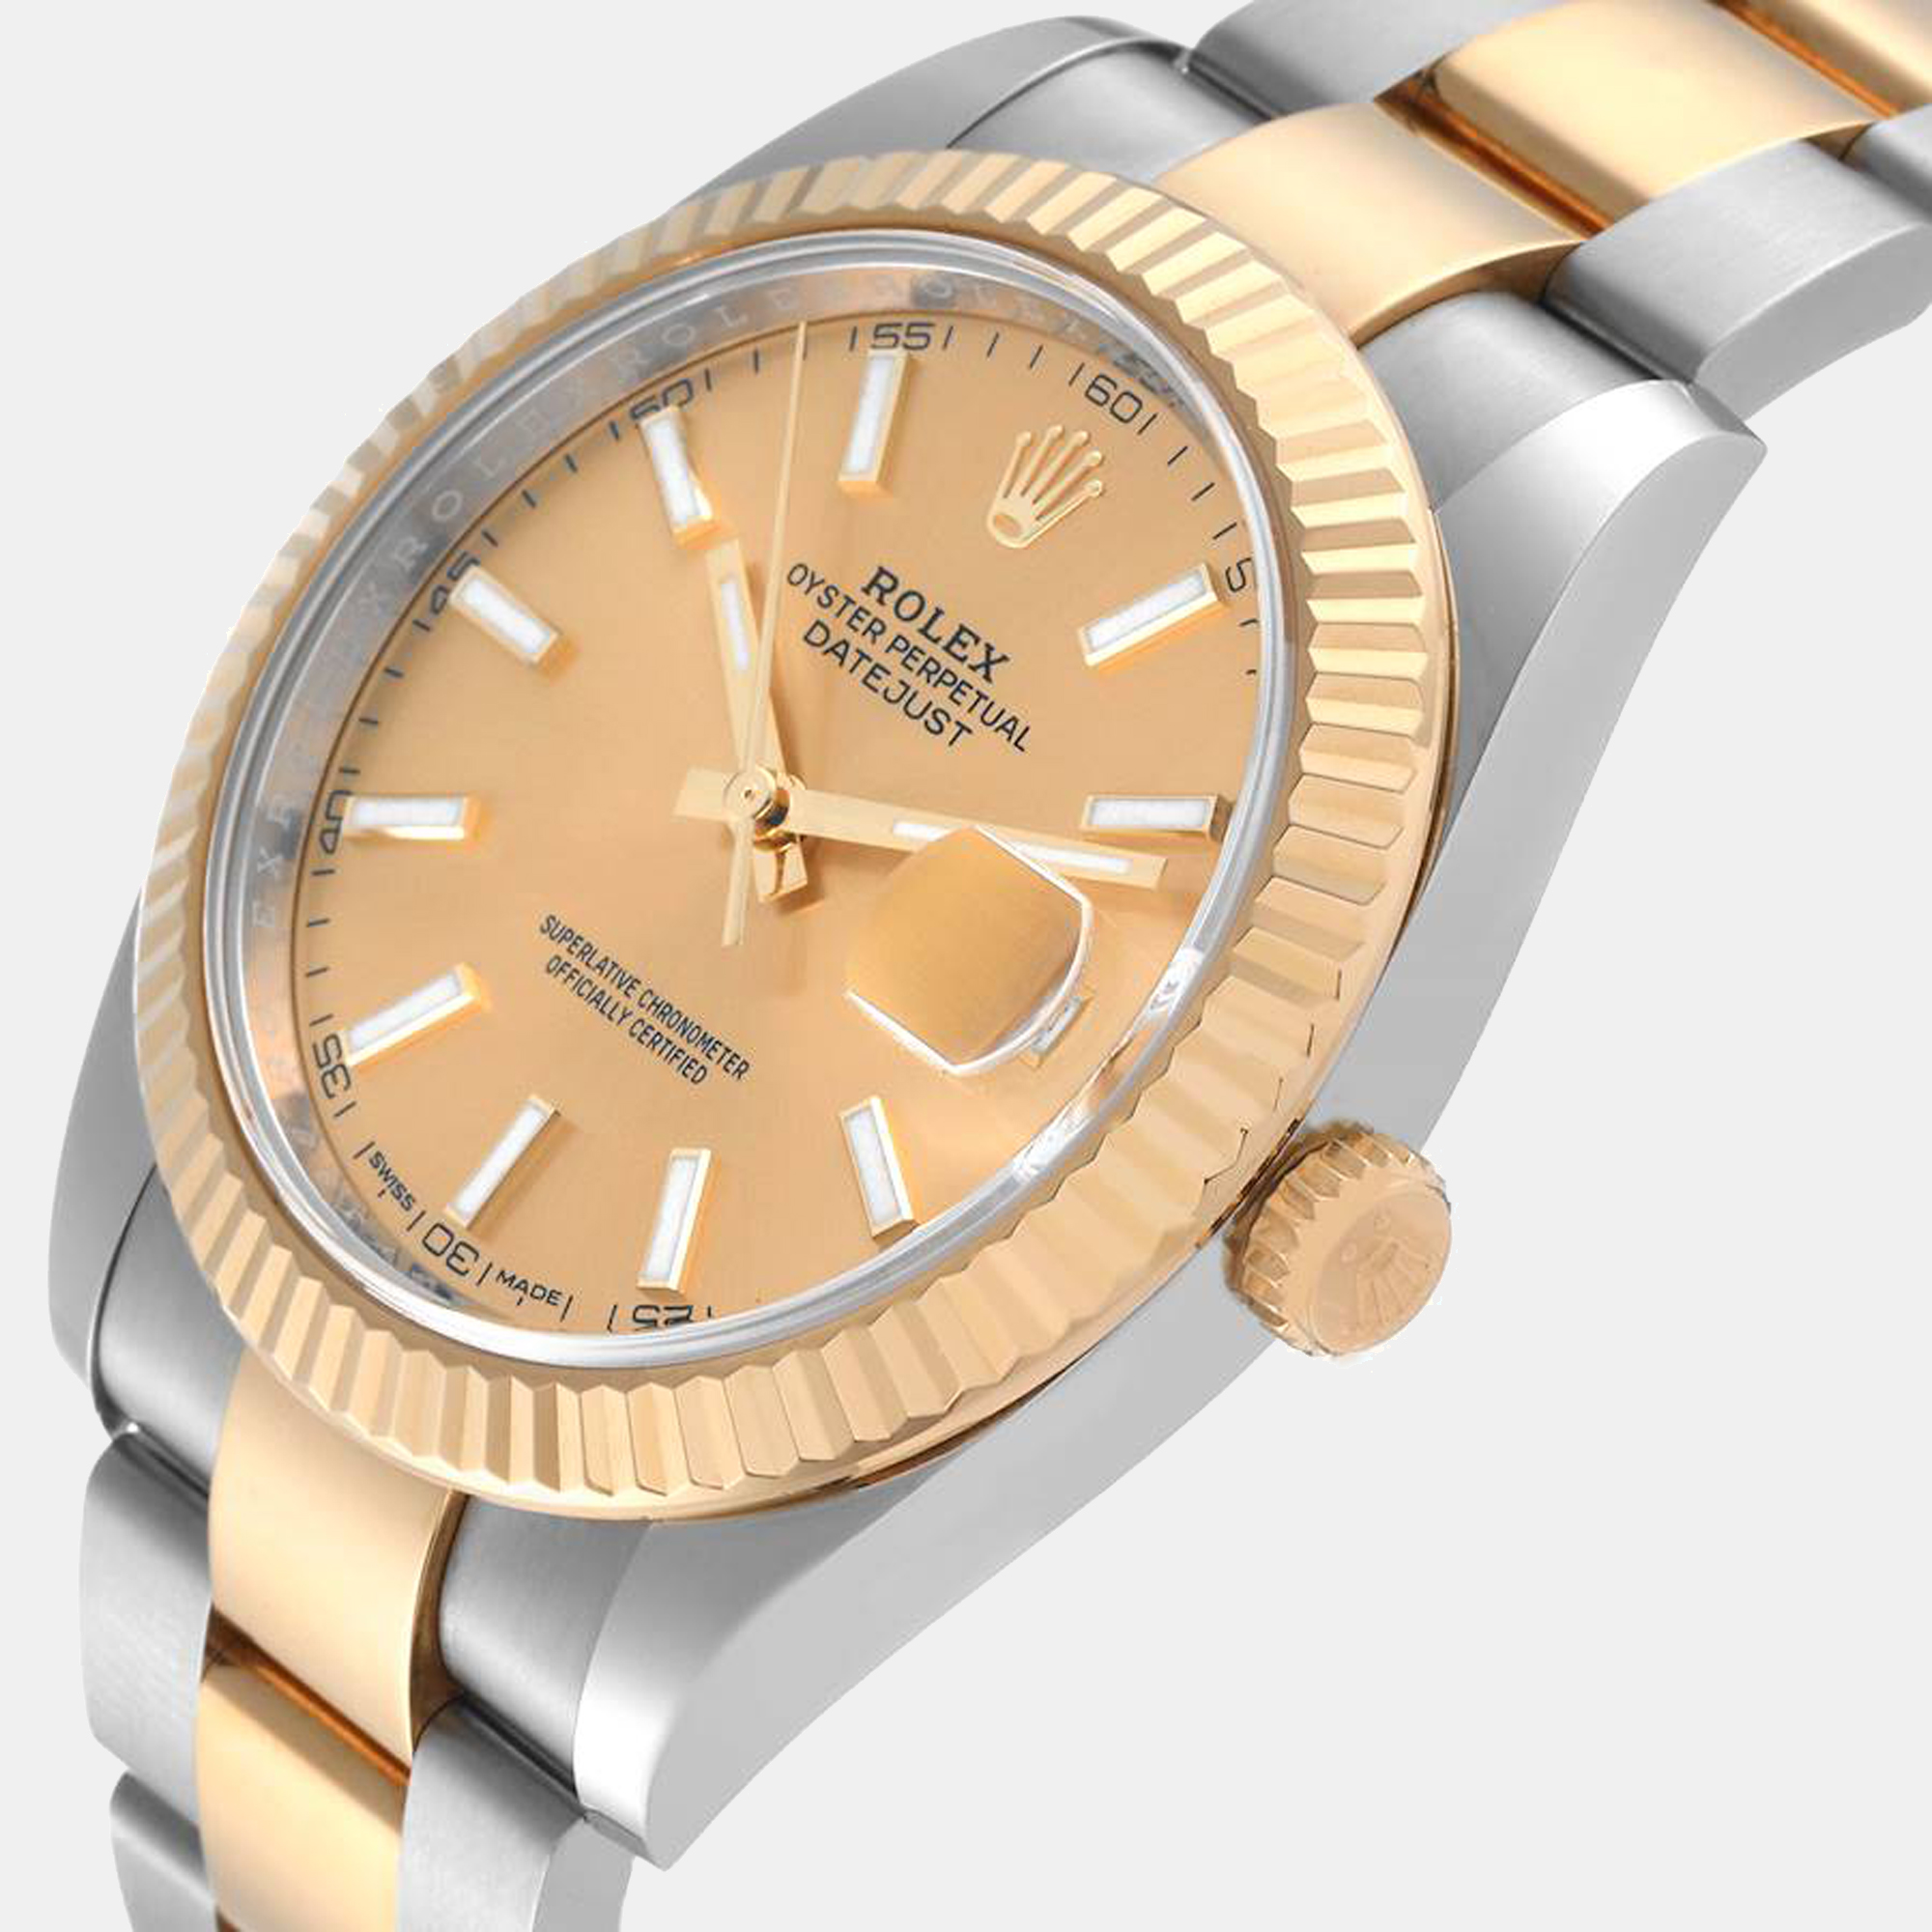 

Rolex Champagne 18K Yellow Gold And Stainless Steel Datejust 126333 Men's Wristwatch 41 mm